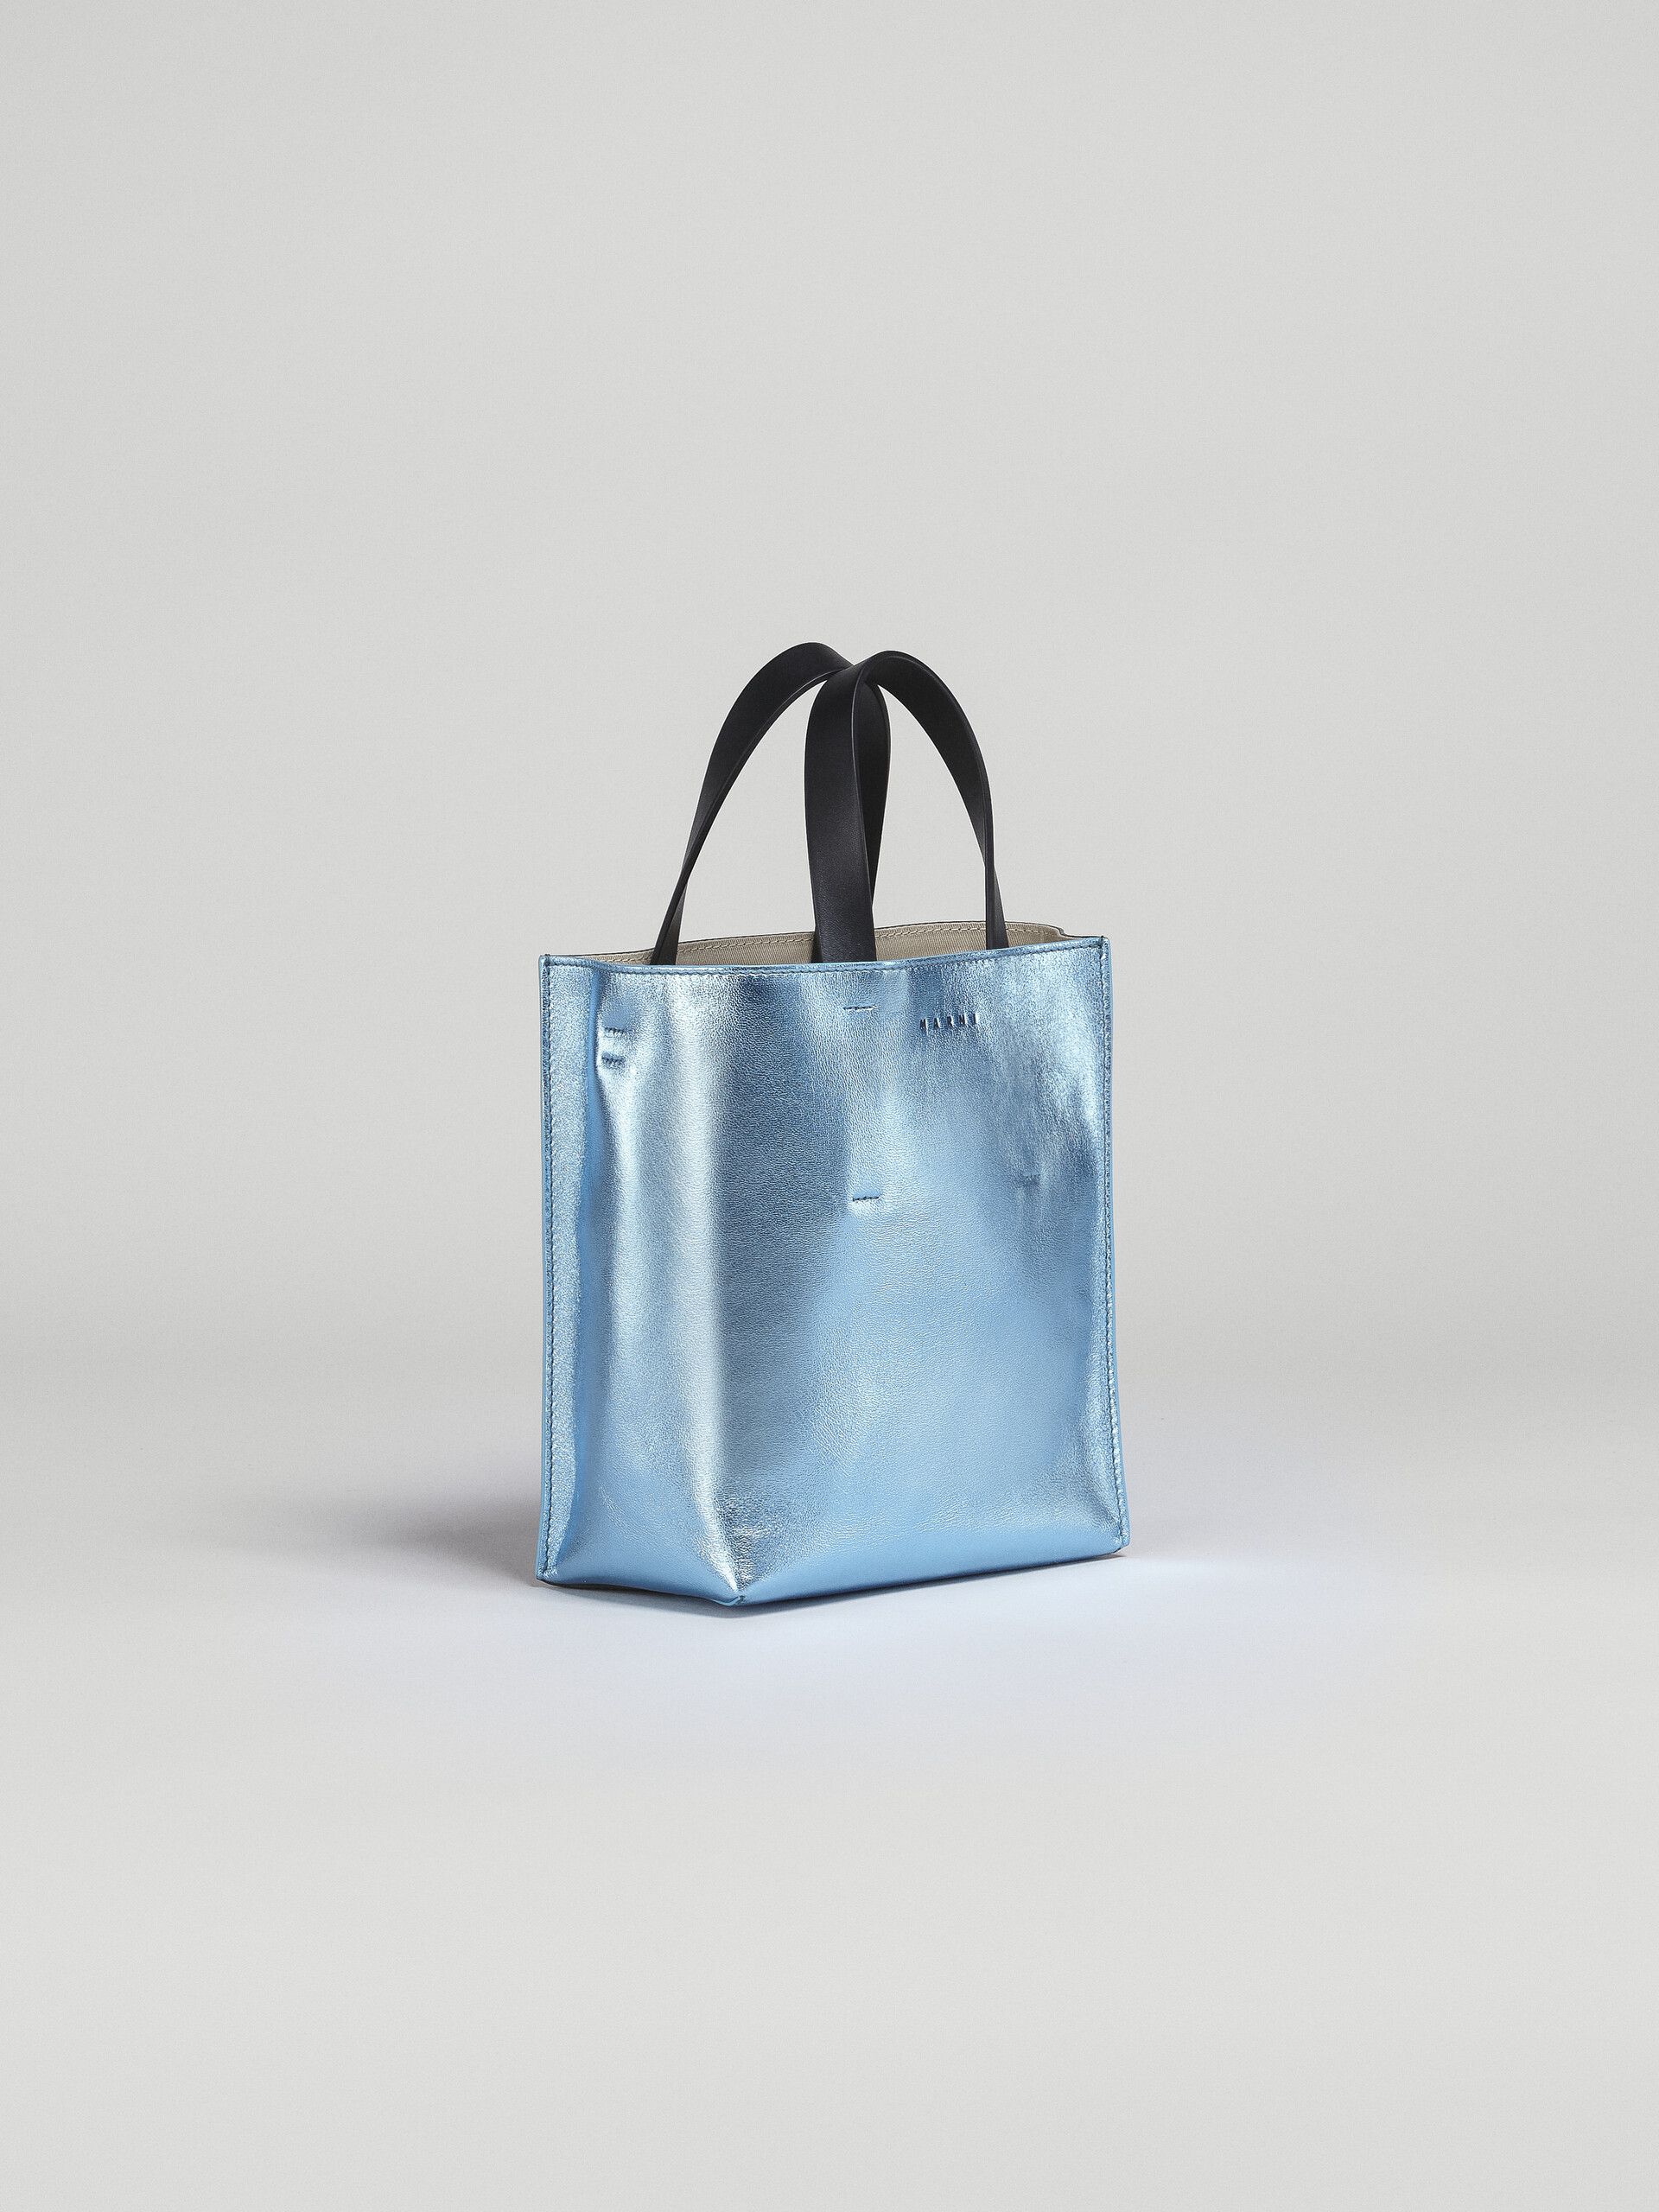 MUSEO mini bag in pale blue and green metallic leather - Shopping Bags - Image 5